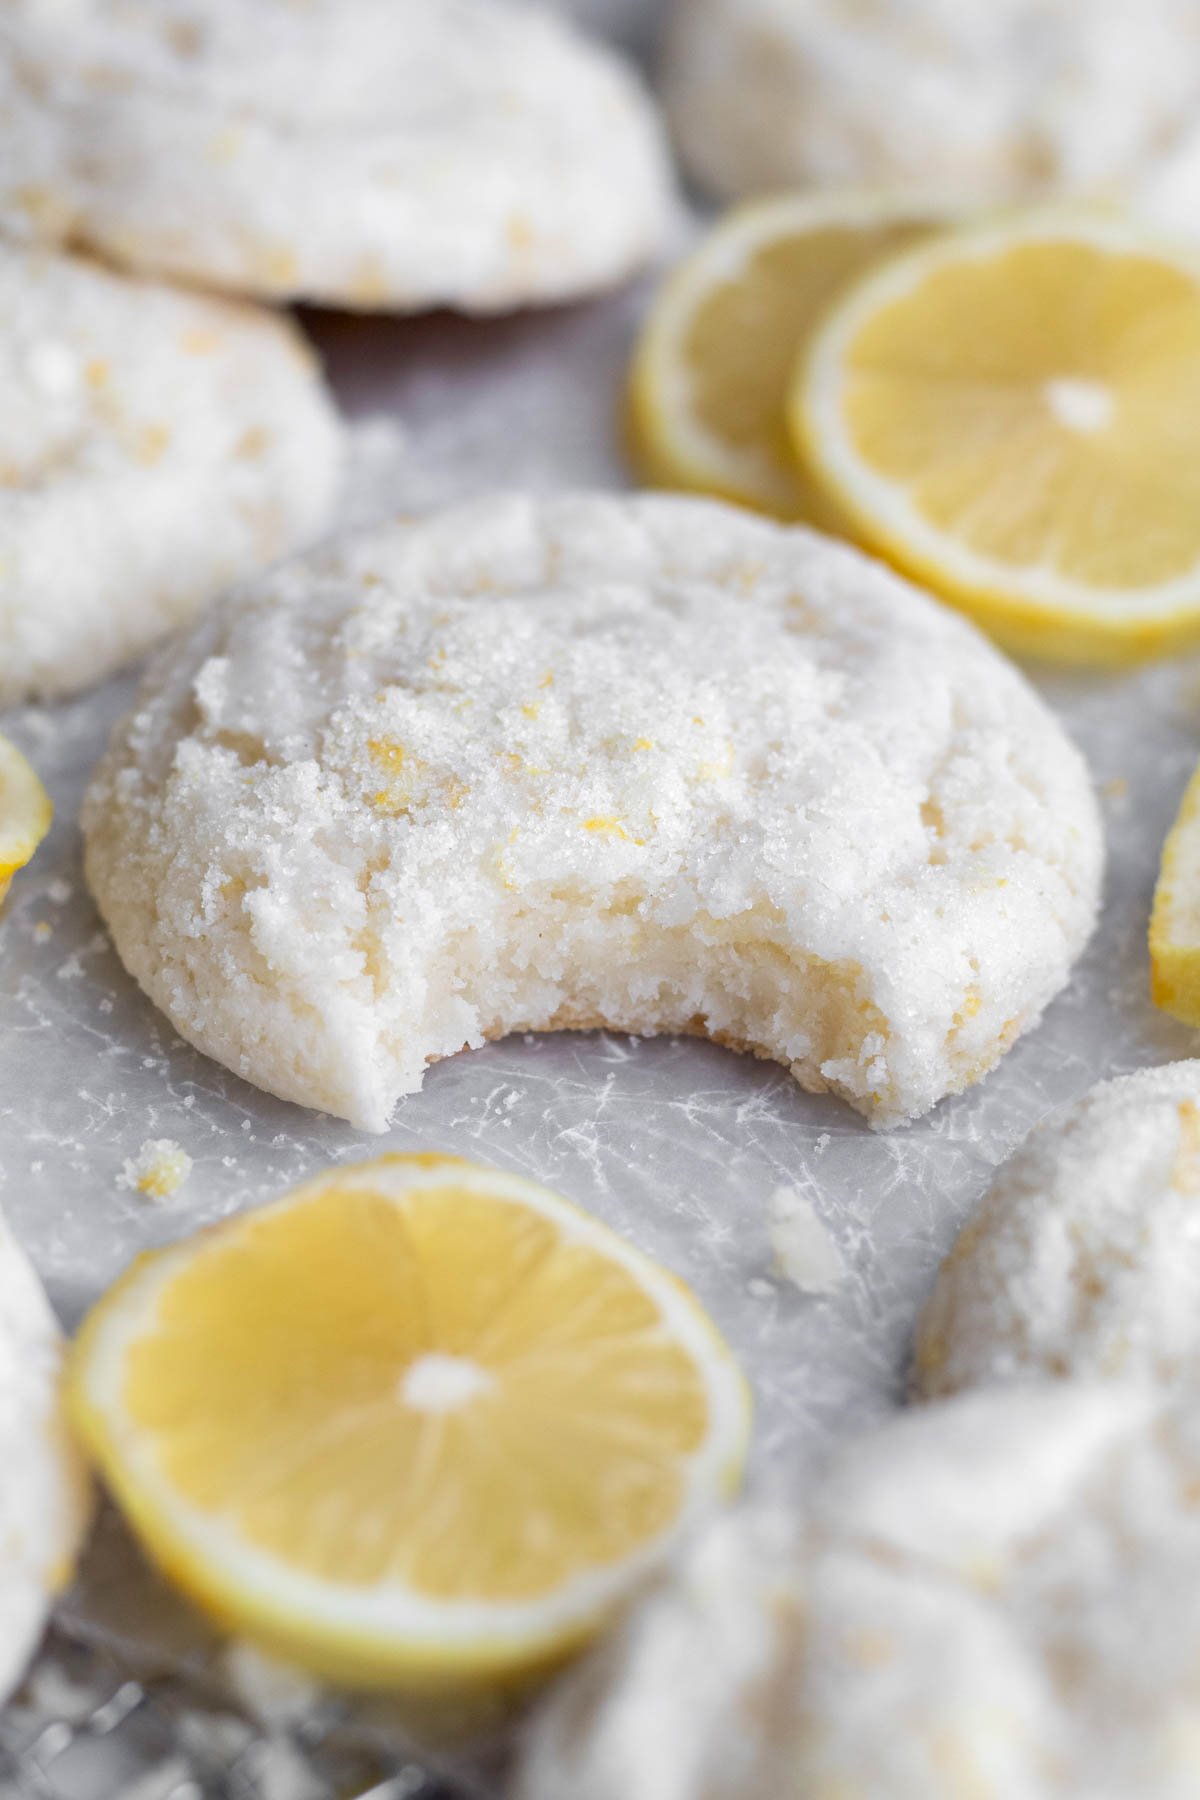 The soft interior of the cookie is encased in a crisp outside of sugary lemon zest.